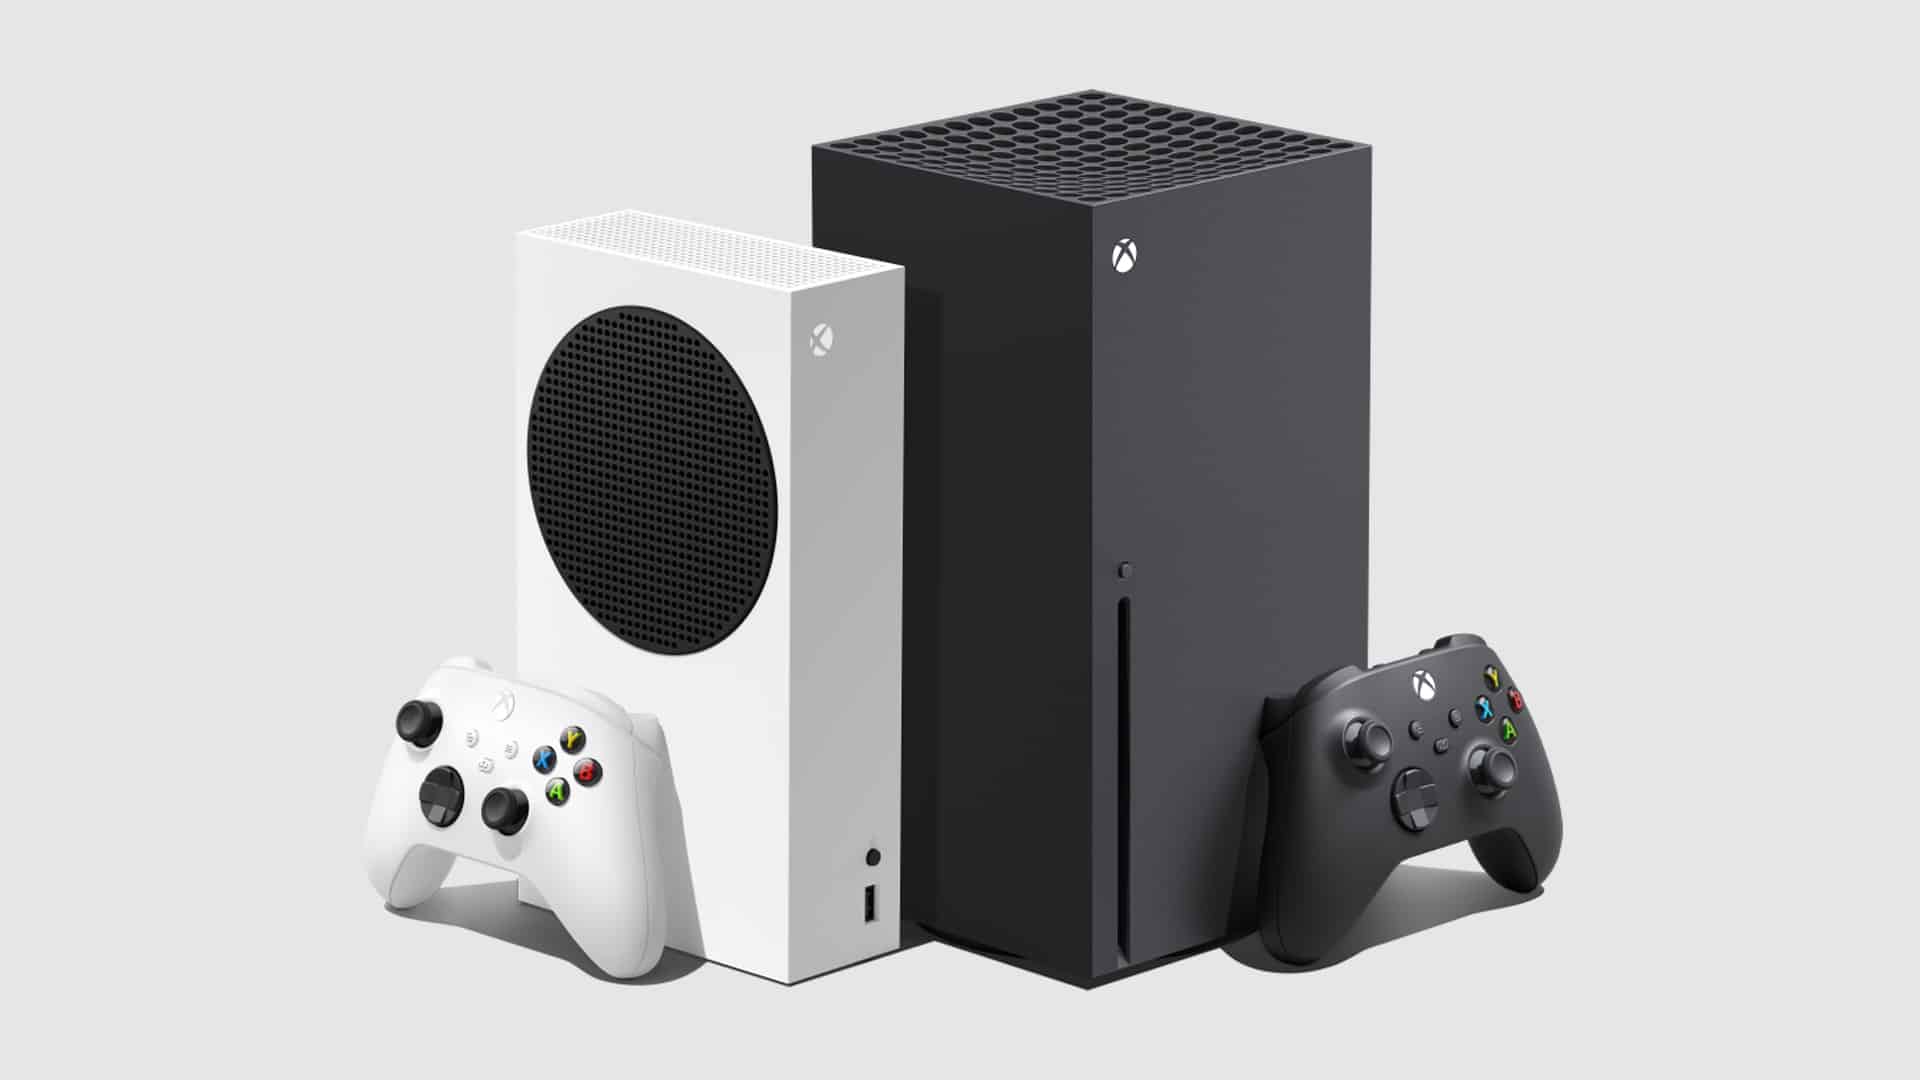 More Xbox Series X and S Launch Day Stock Coming to SA